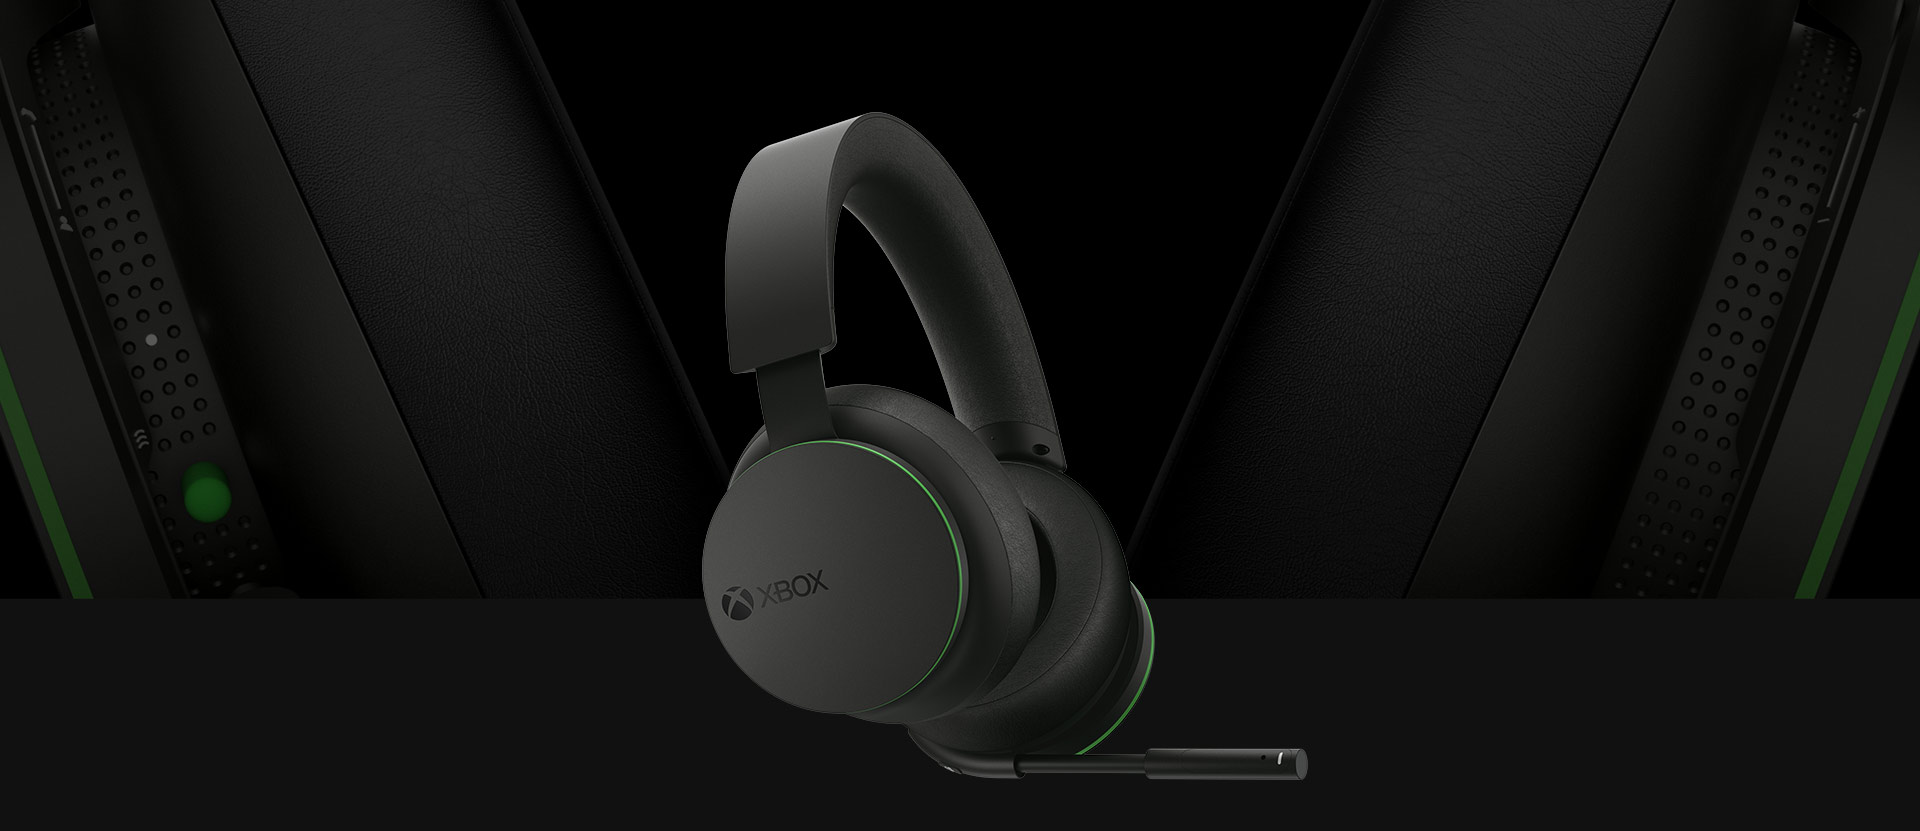 Microsoft announce ‘Xbox Wireless Headset’ – $99 gaming headphones that tick all the right boxes